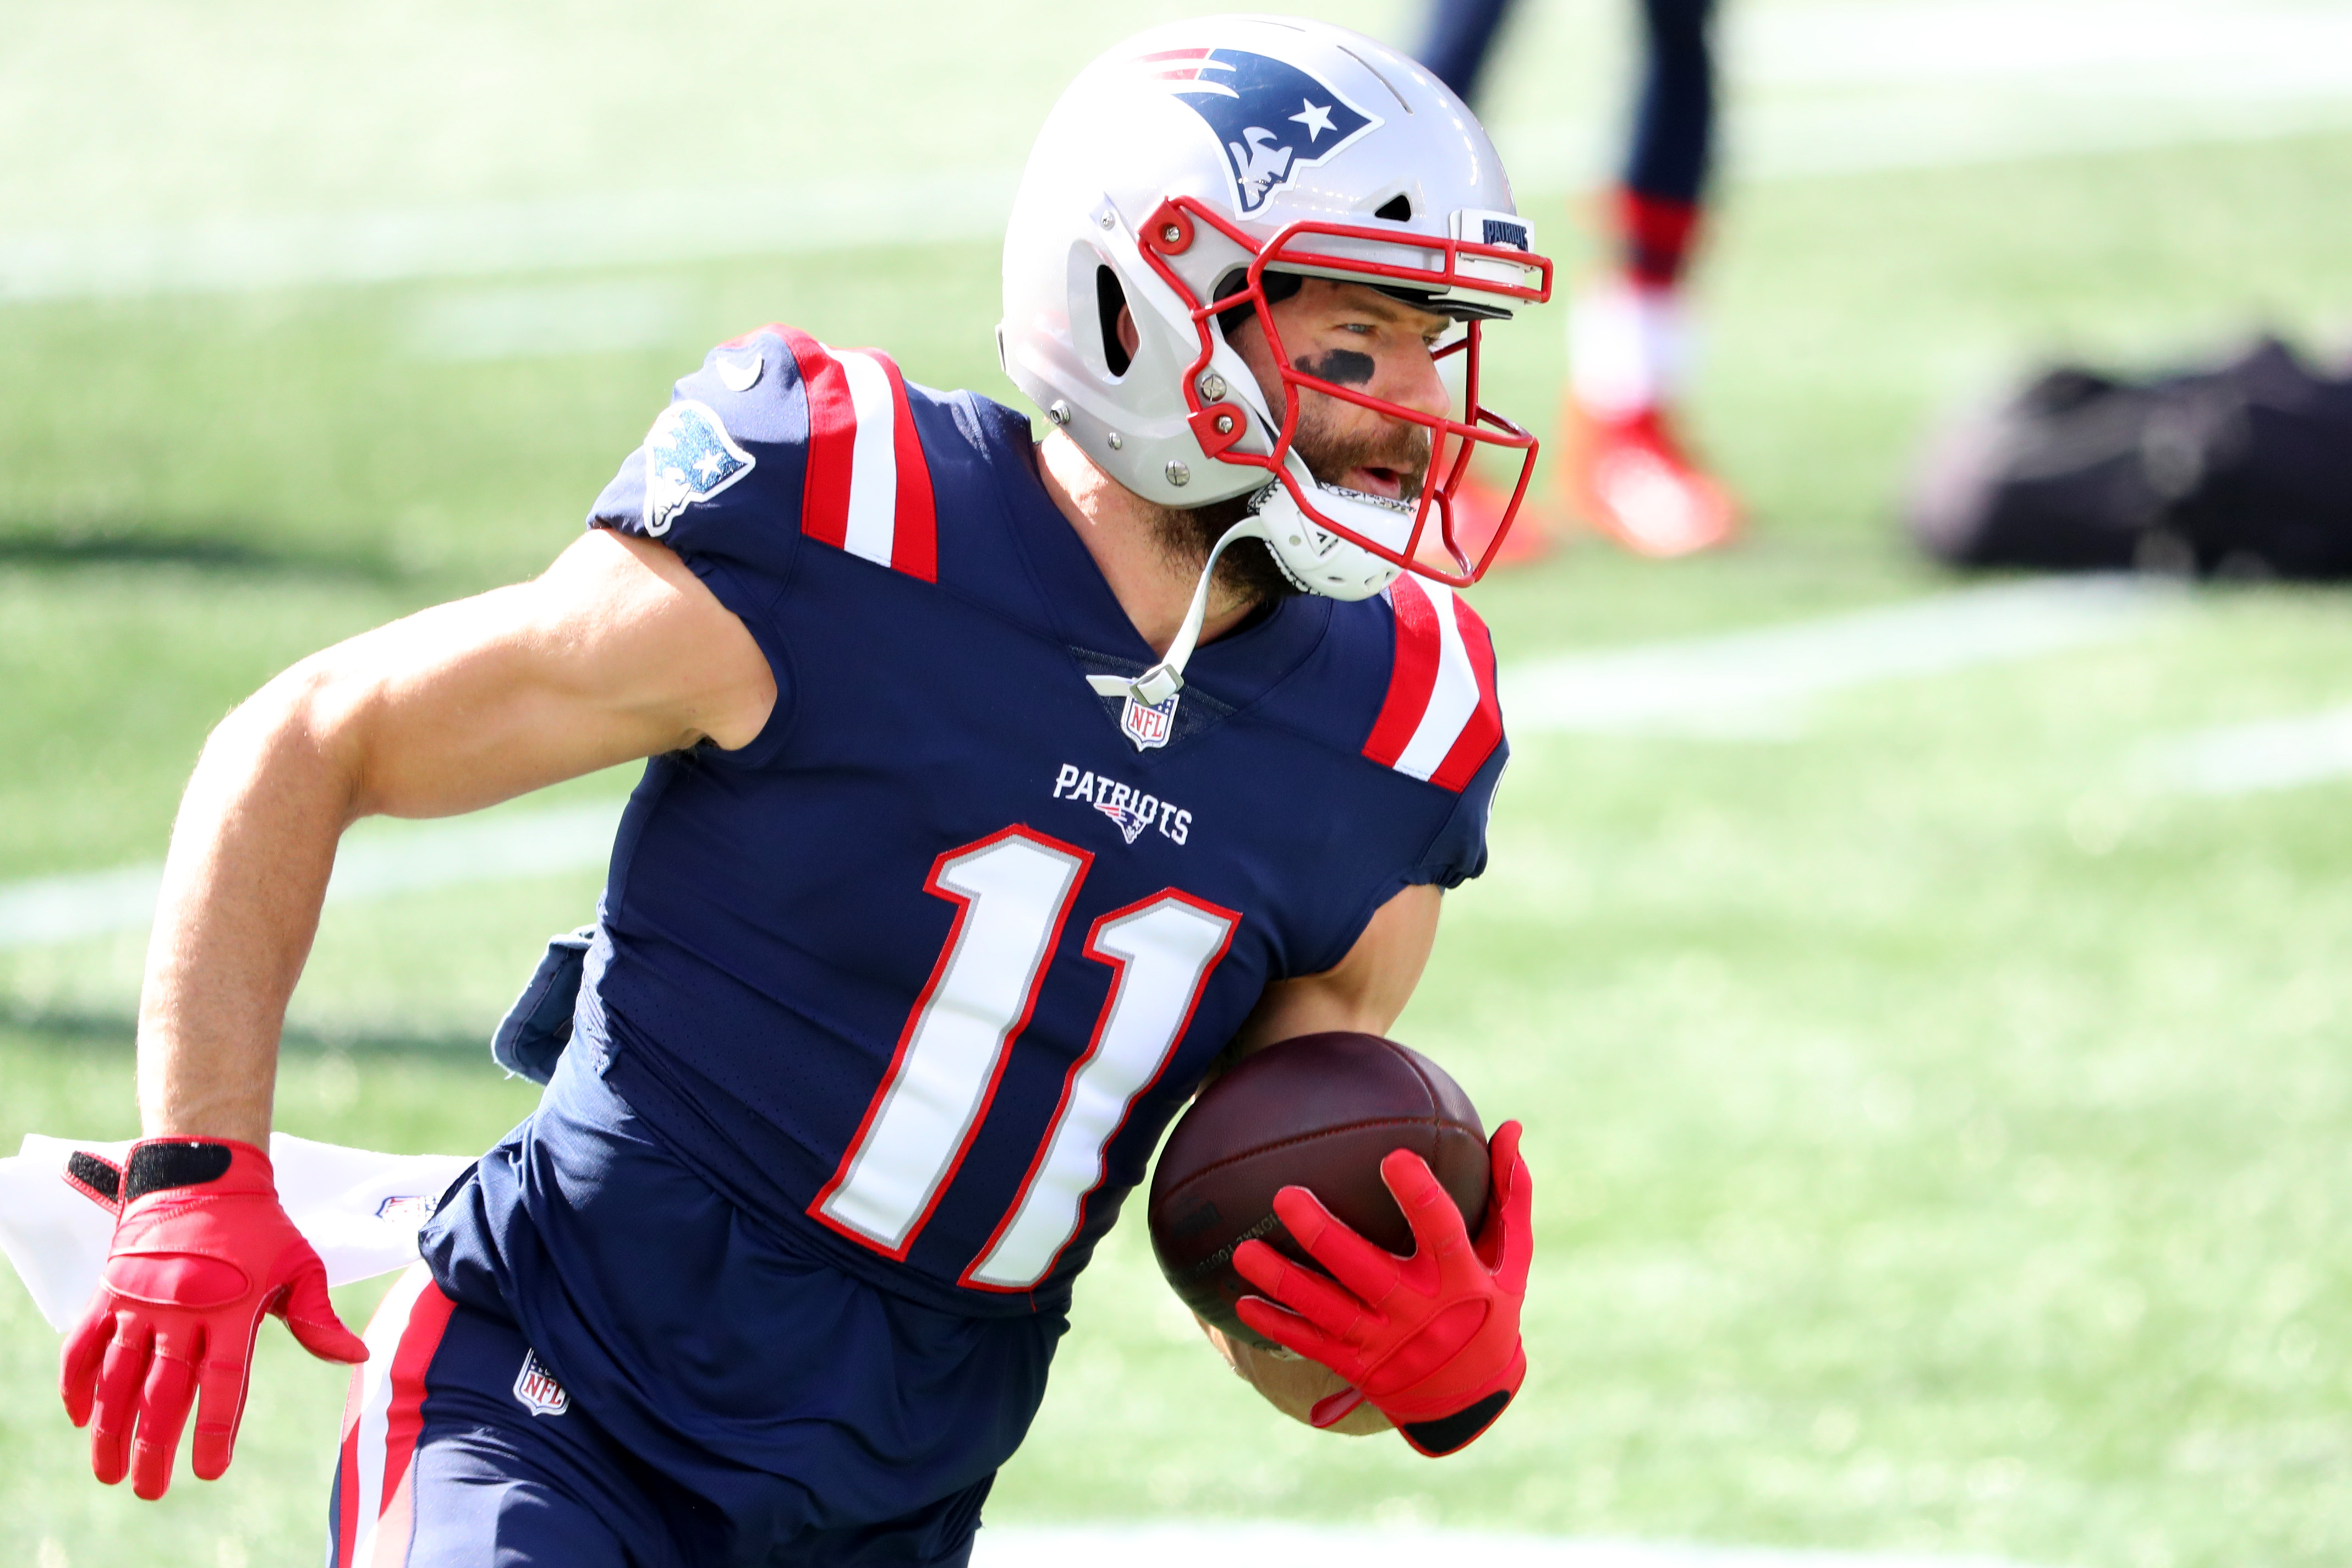 Julian Edelman of the New England Patriots warms up before the game against the Denver Broncos at Gillette Stadium on October 18, 2020.